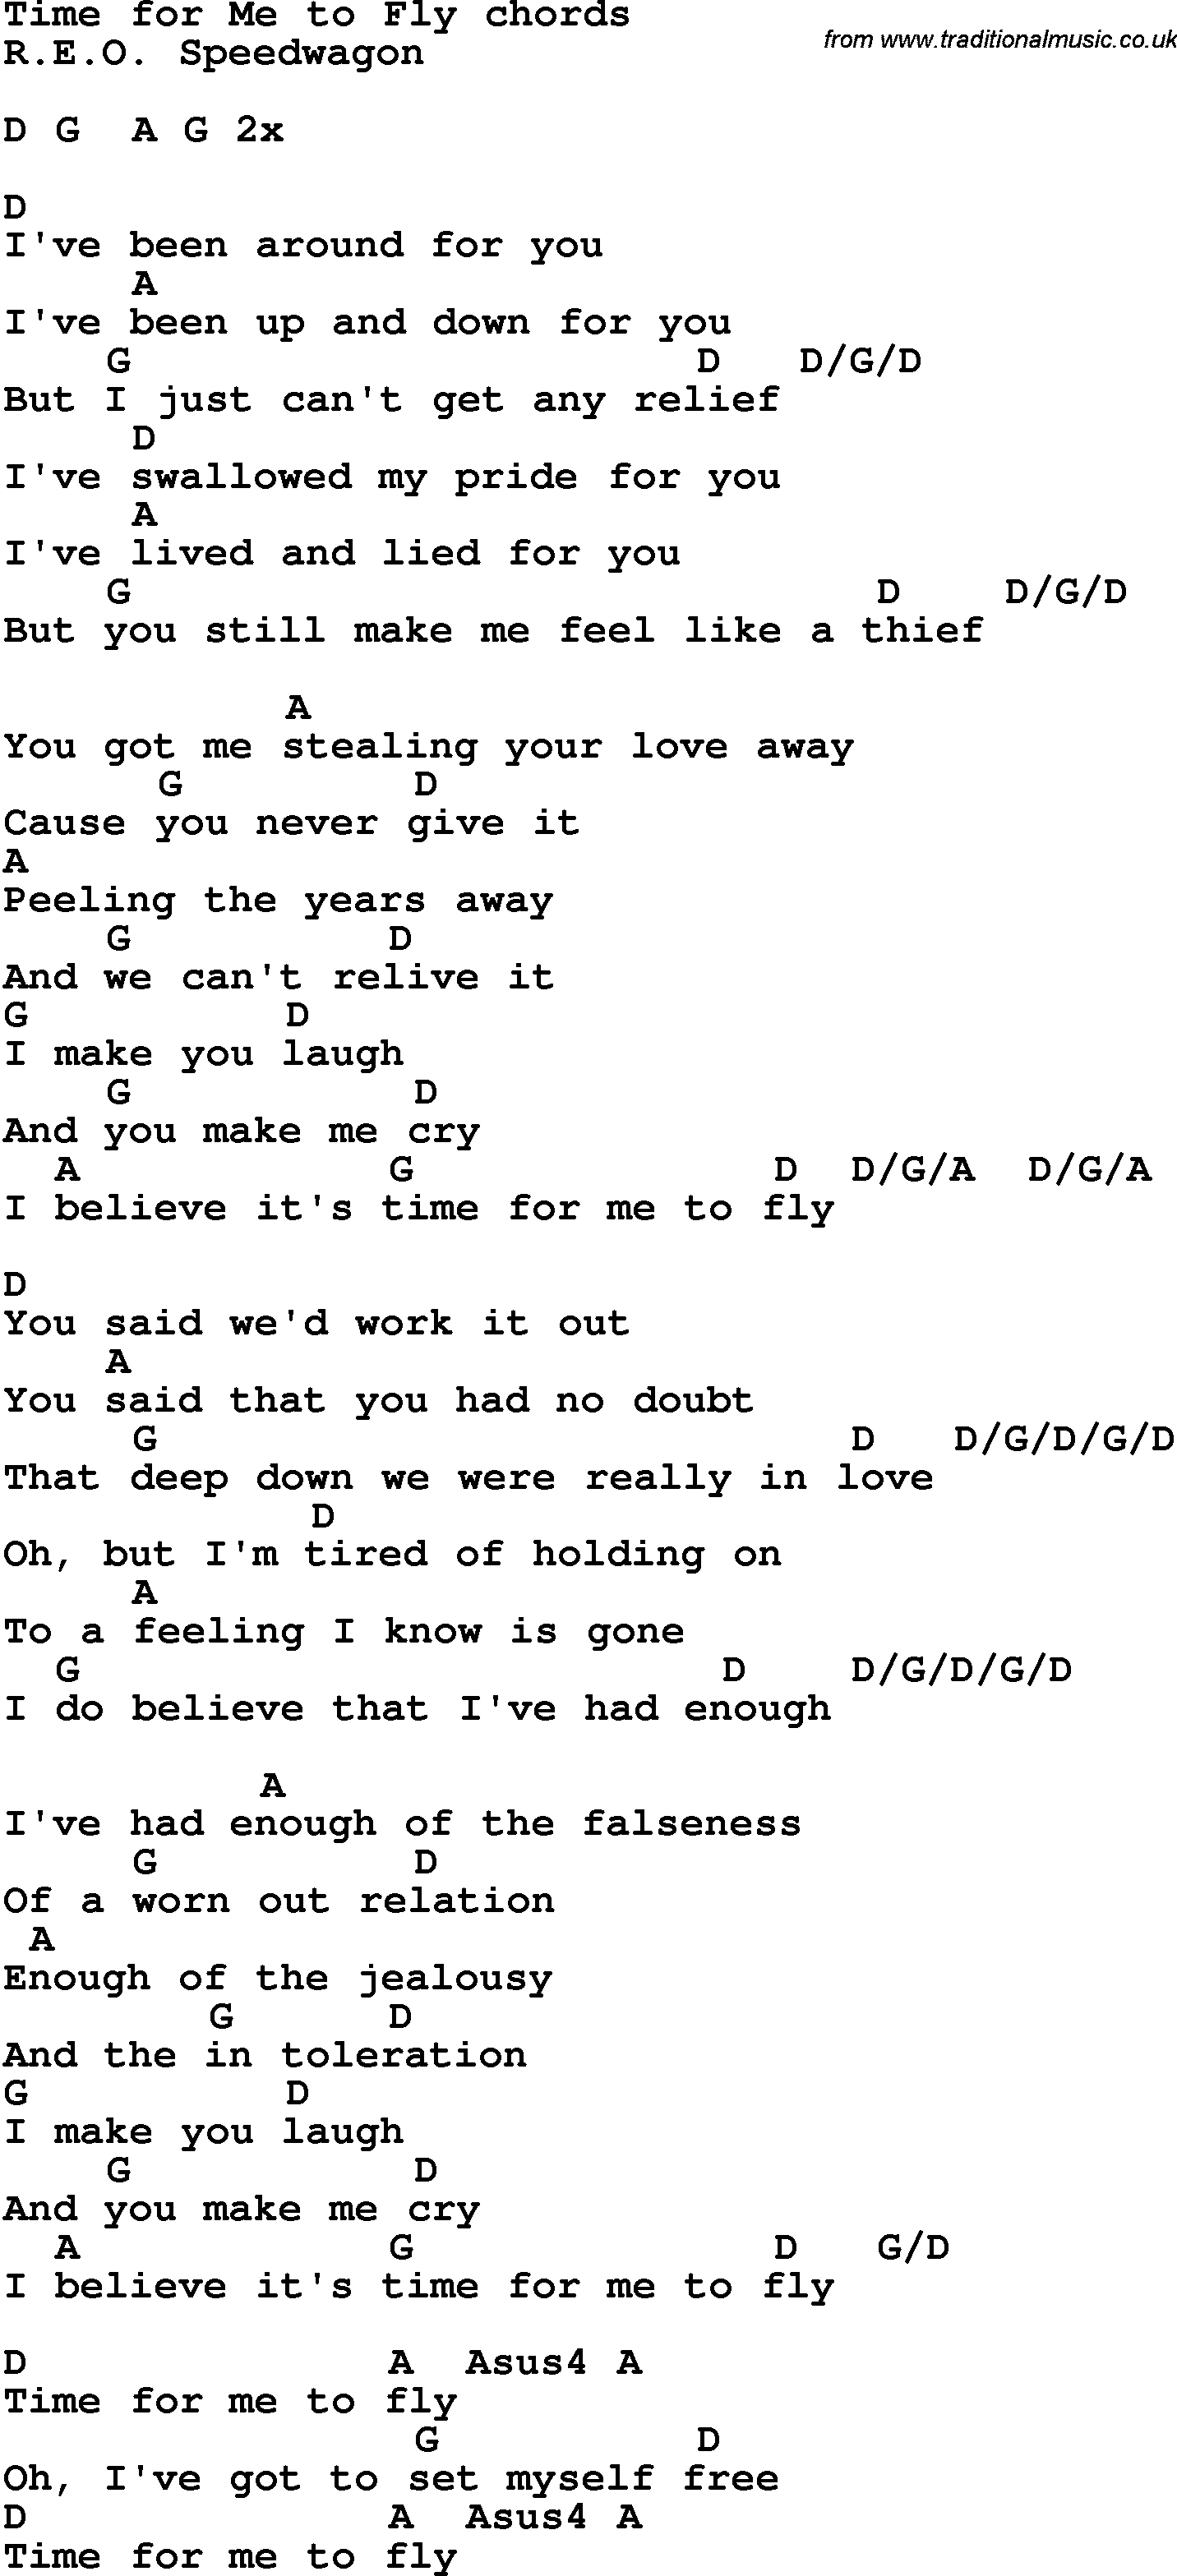 Song Lyrics with guitar chords for Time For Me To Fly